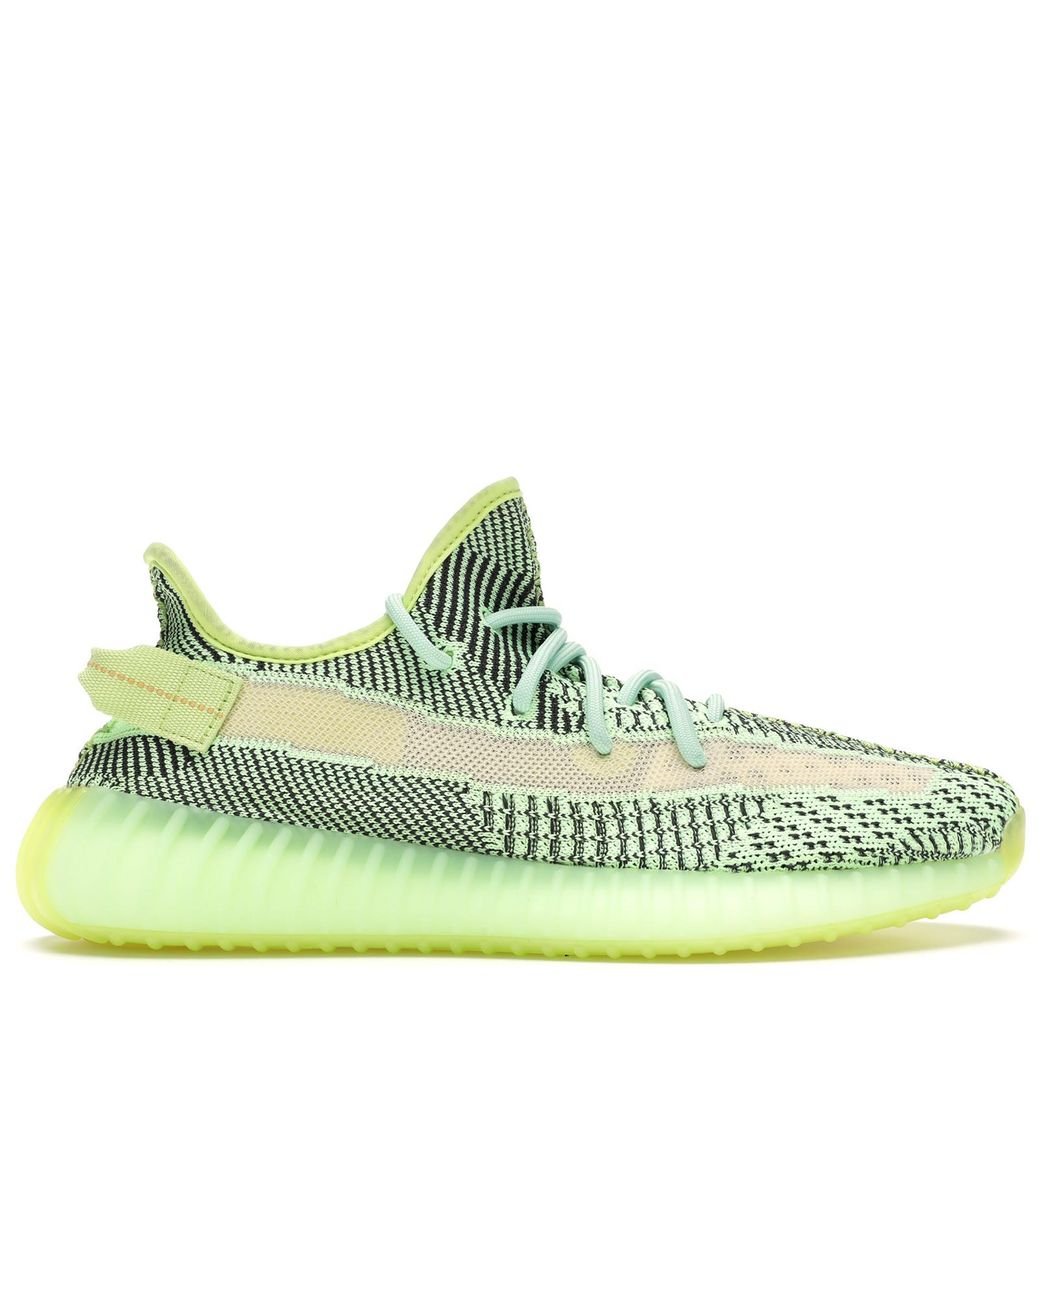 how much are the lime green yeezys